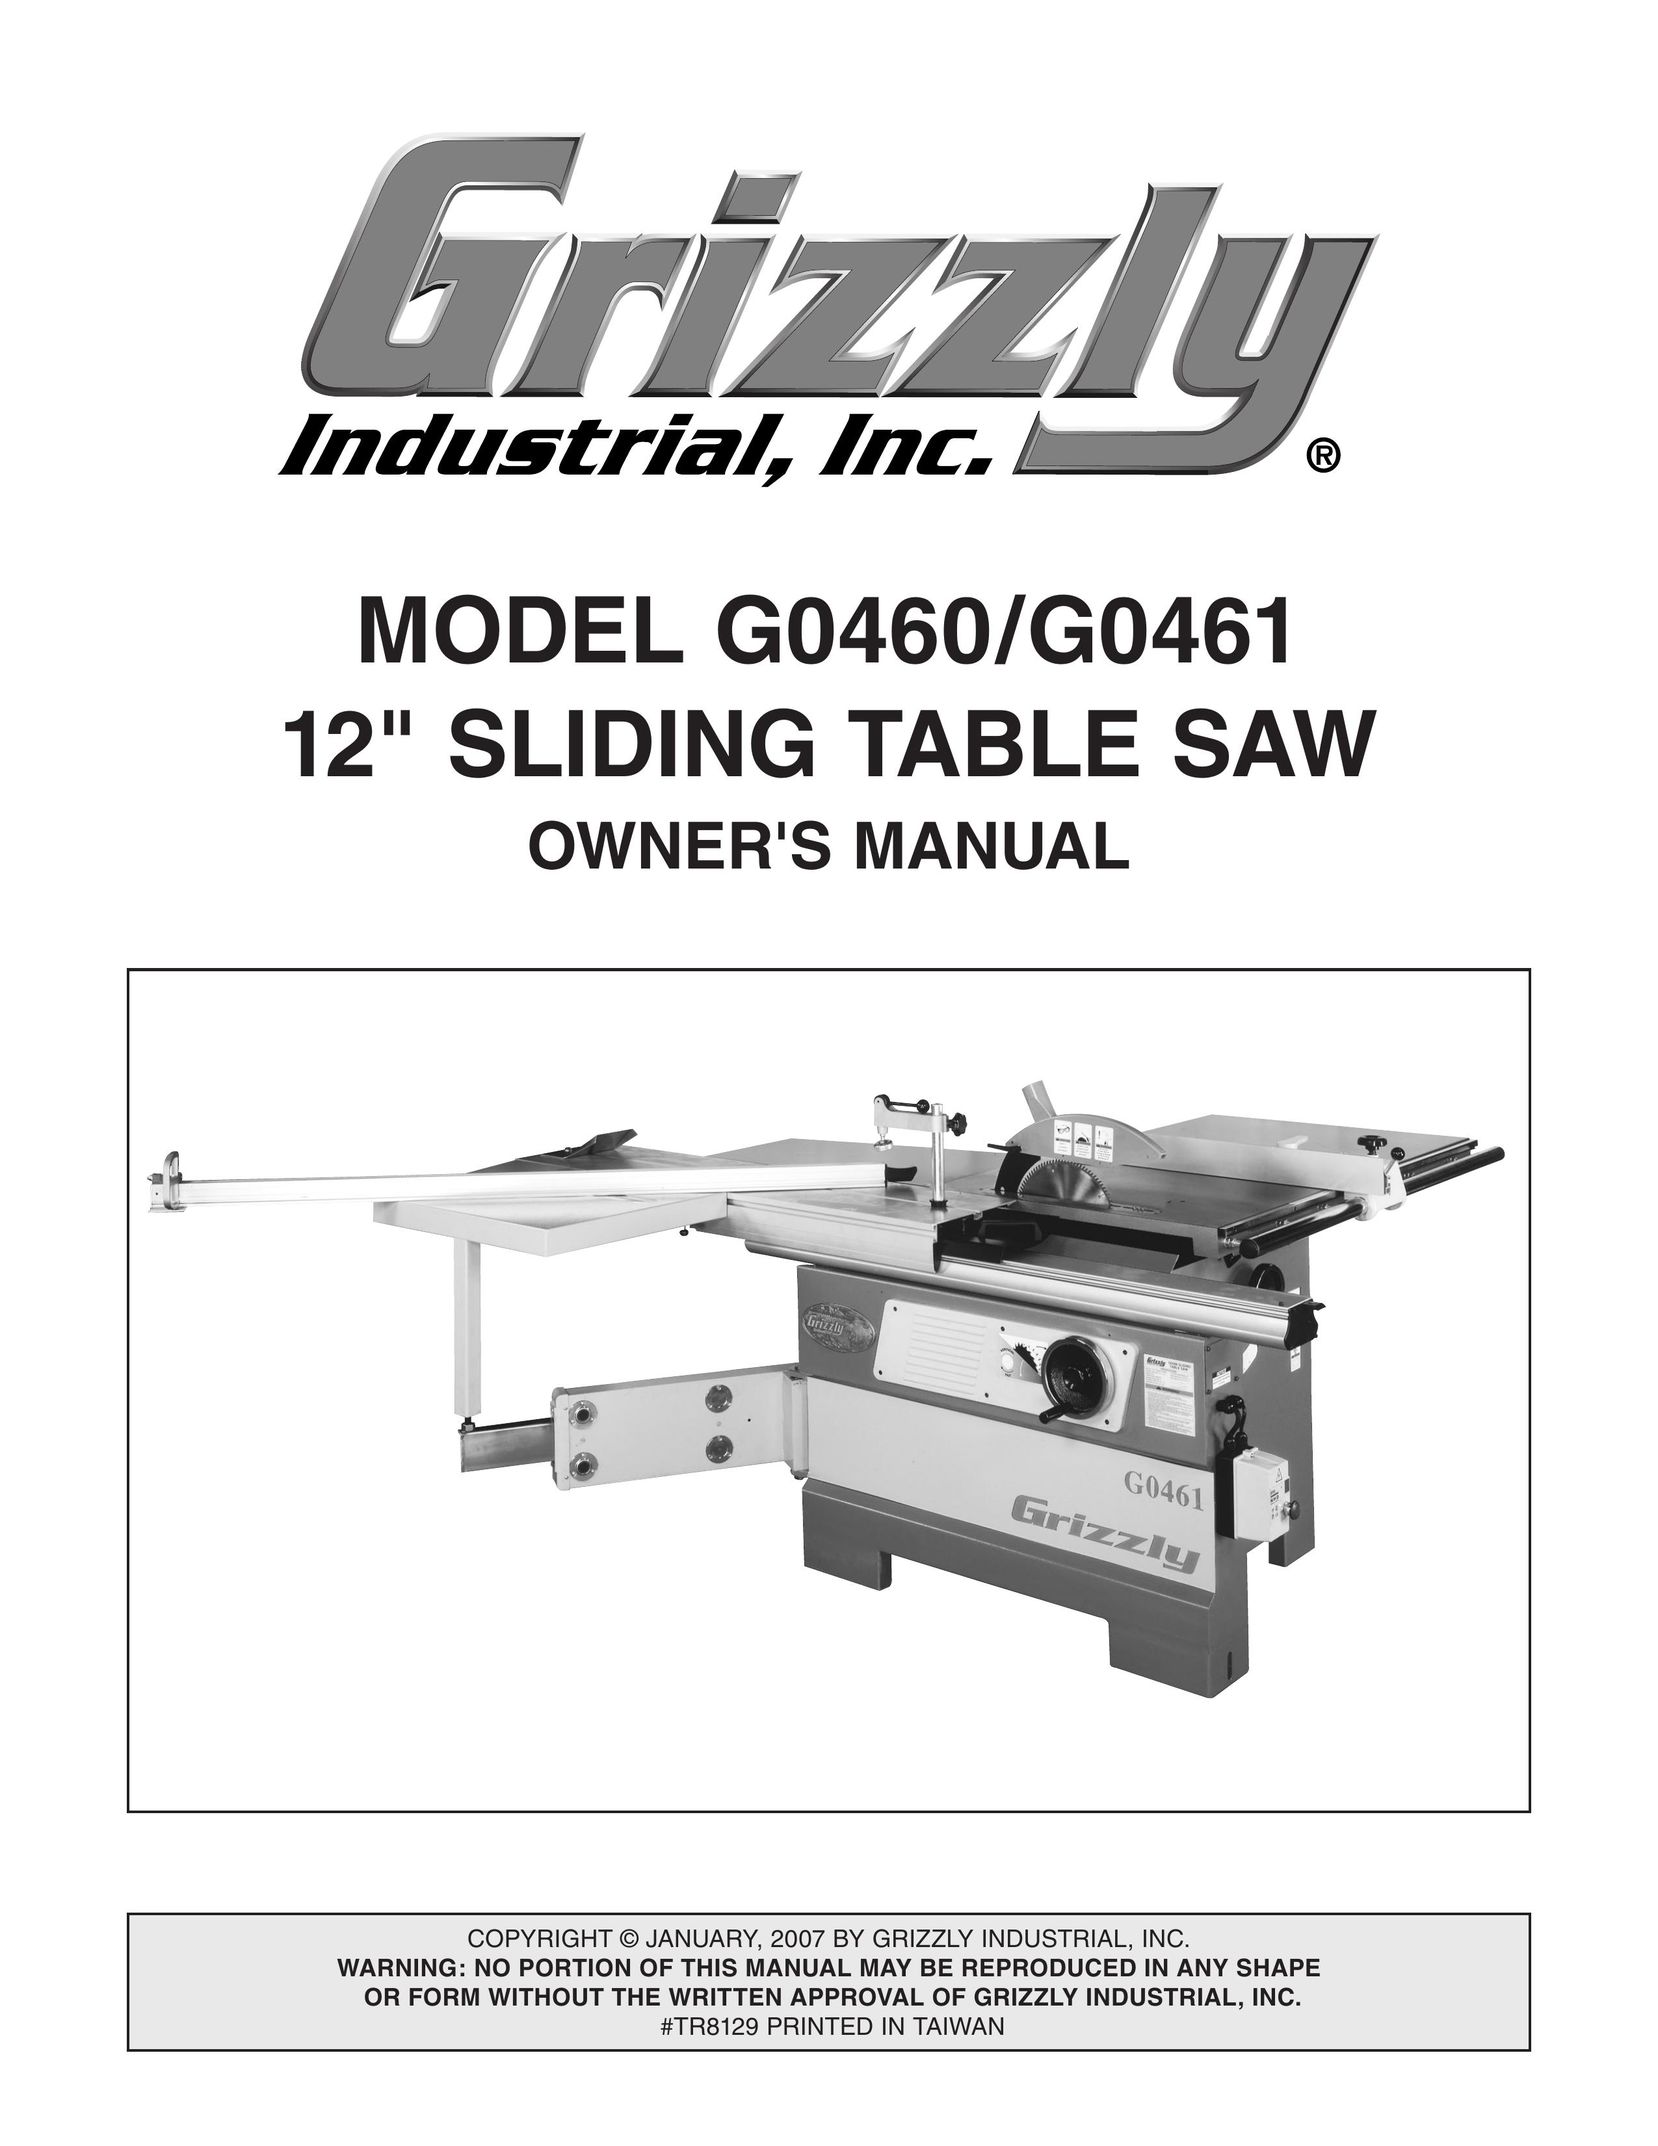 Grizzly G0460/G0461 Saw User Manual